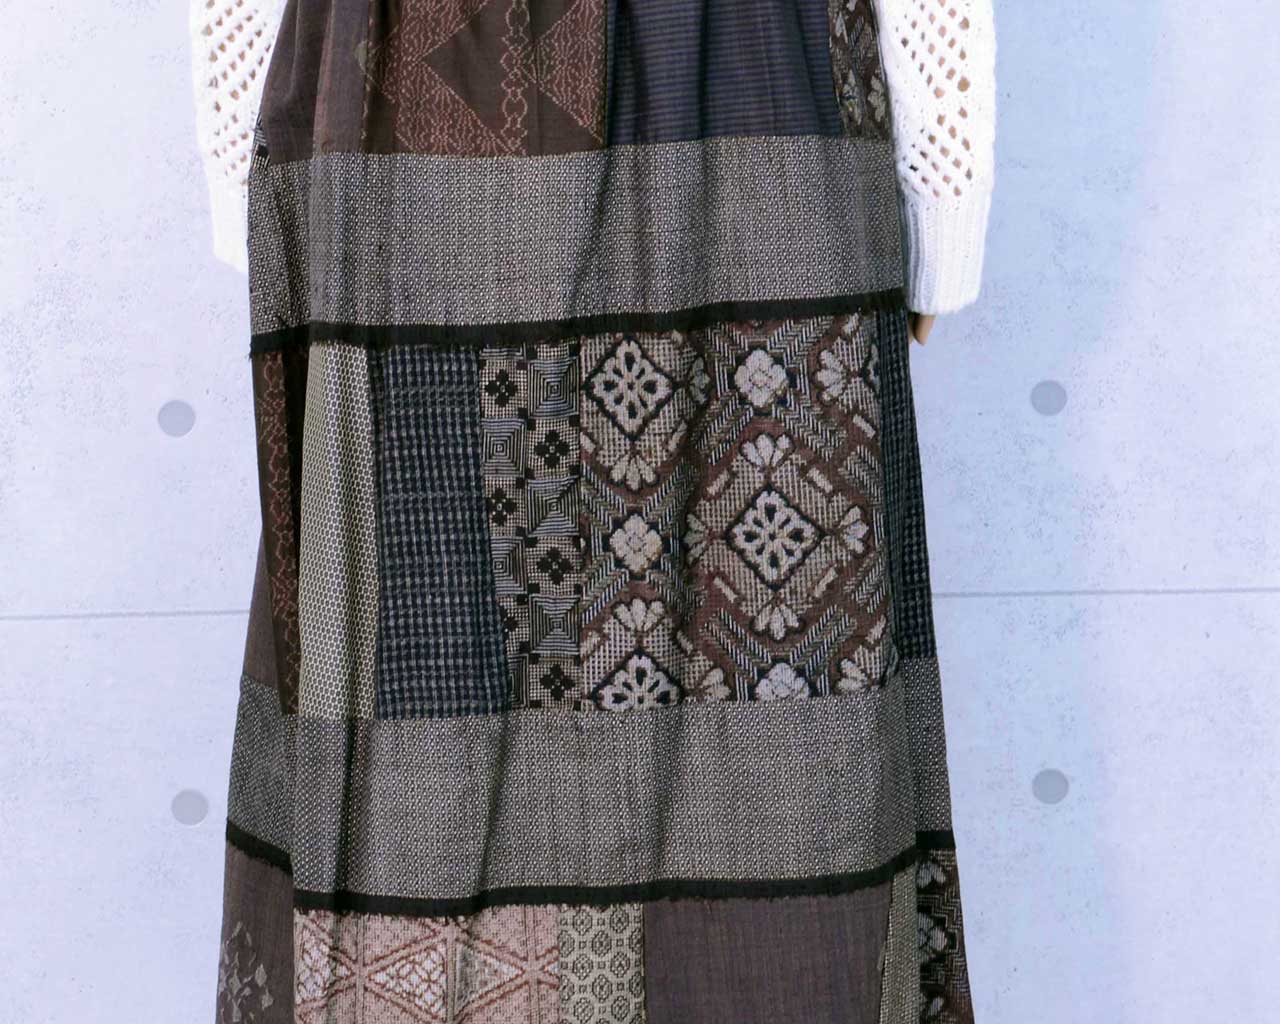 Three tiered tiered skirt made of several types of pongee